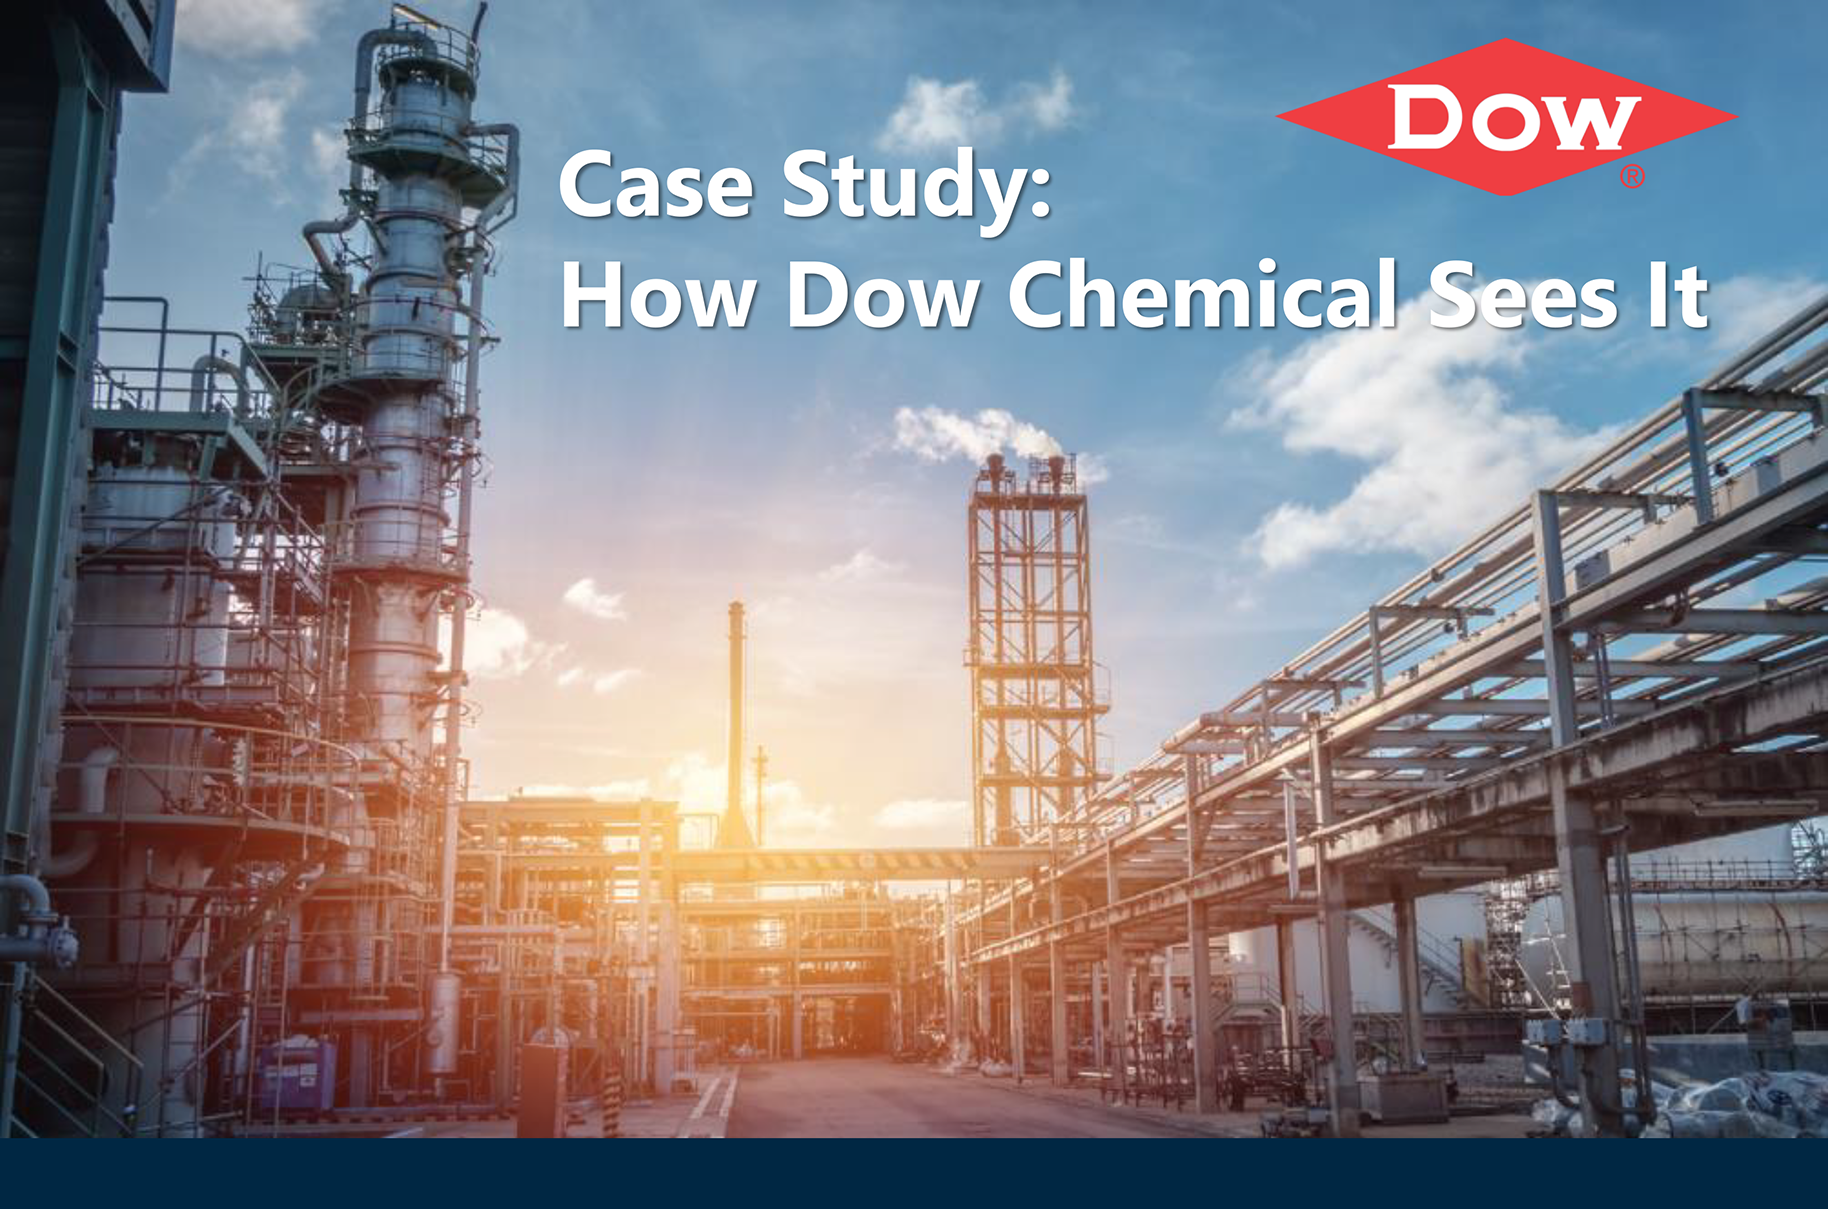 Case Study: How Dow Chemical Sees It